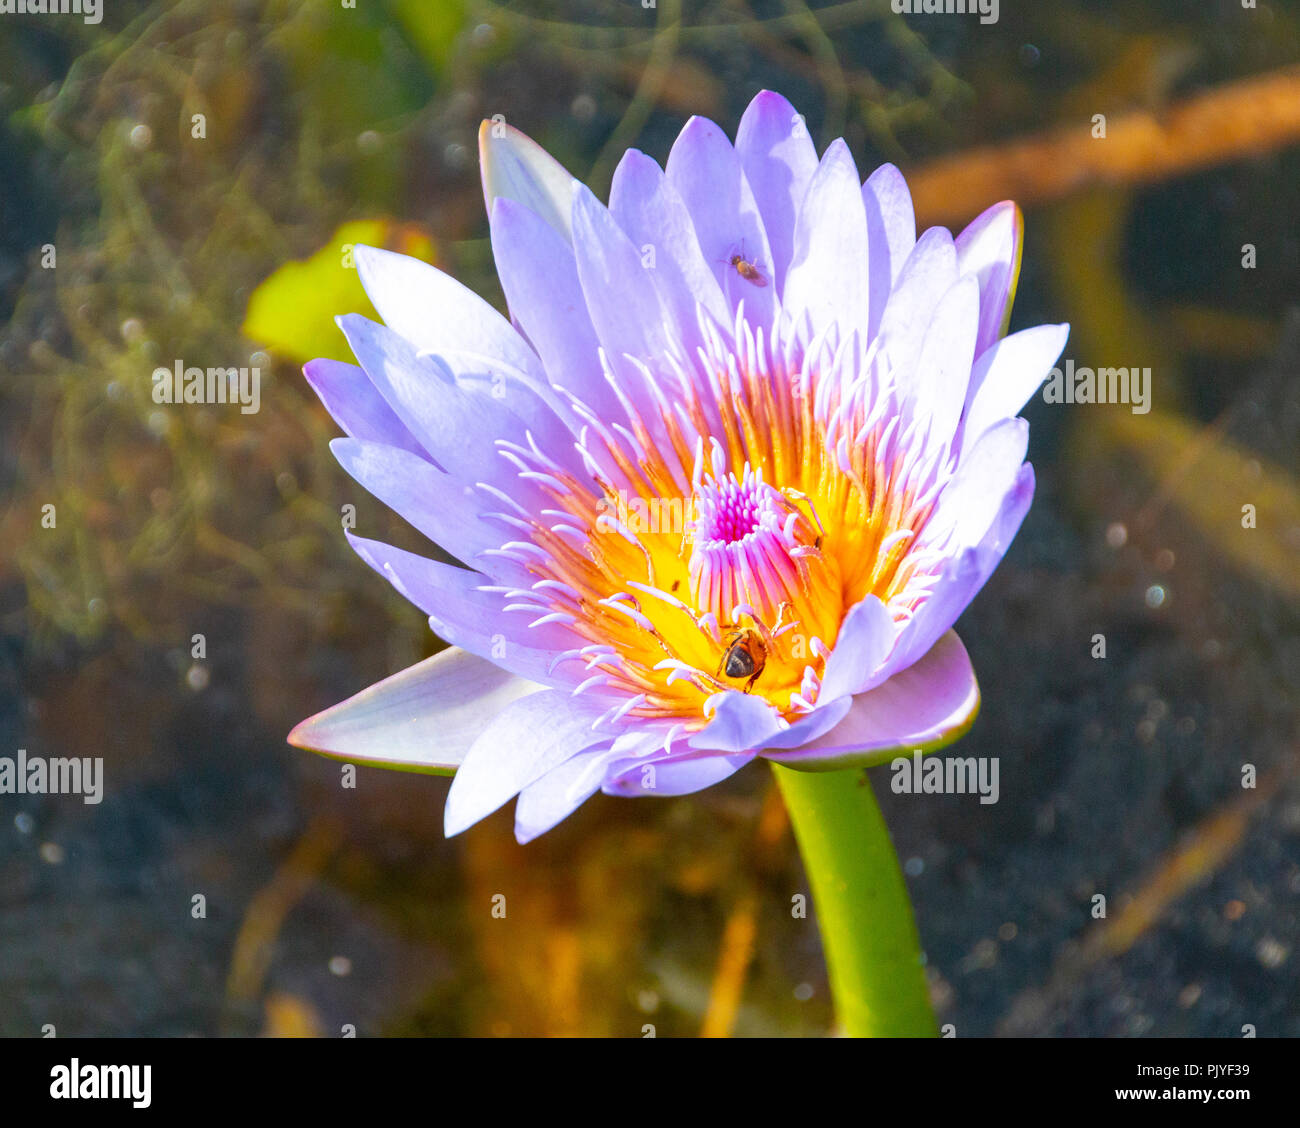 A close up view of a purple and orange water lilly with the back of a honey bee on the side Stock Photo